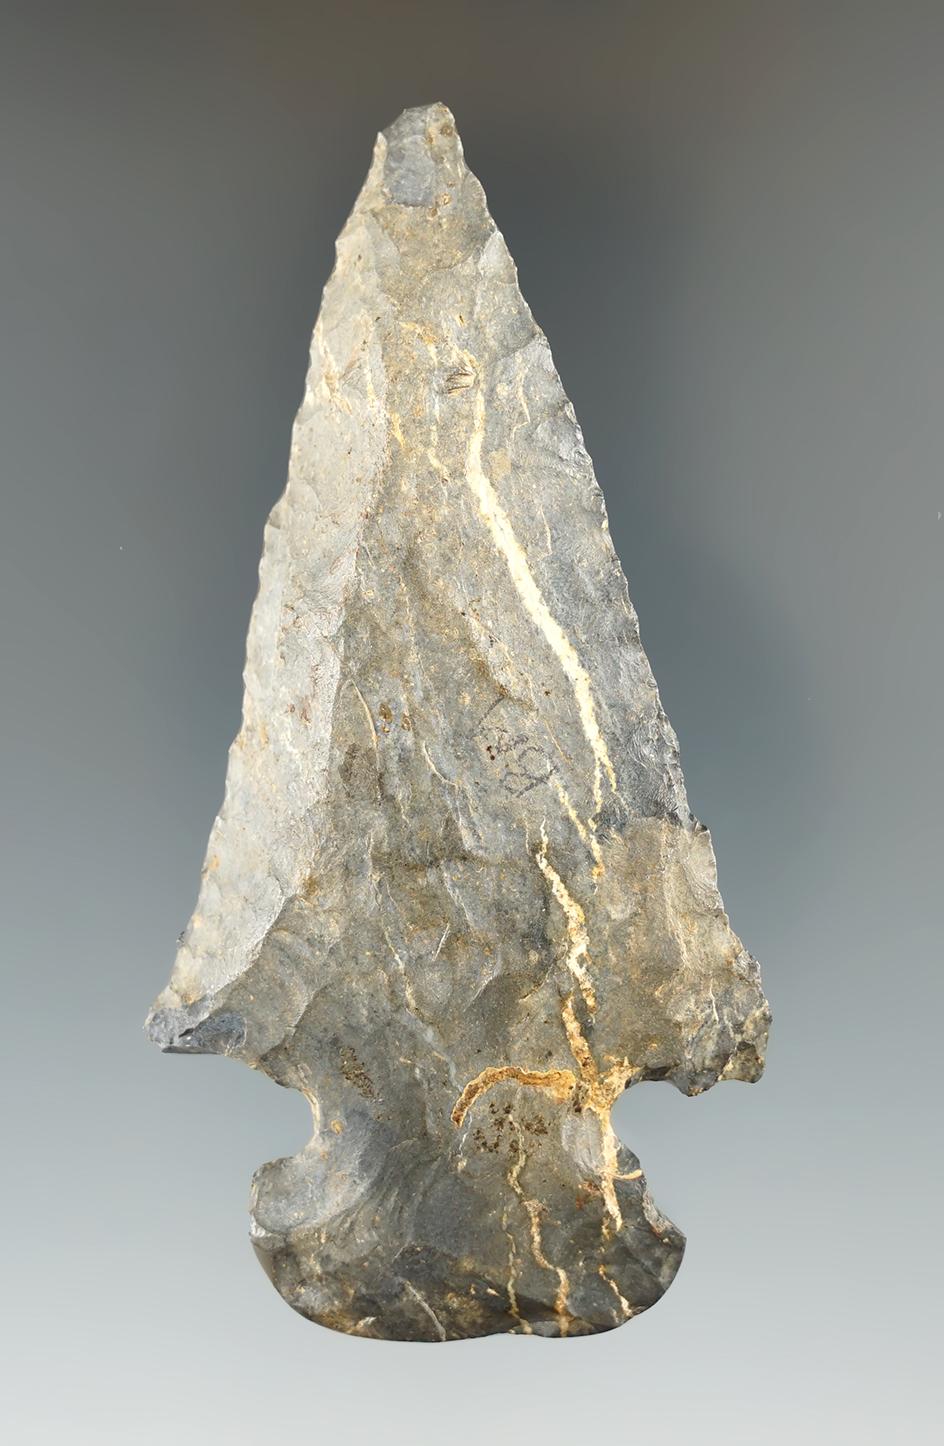 3 5/8" steeply beveled Coshocton flint Dovetail found in Coshocton Co., Ohio.